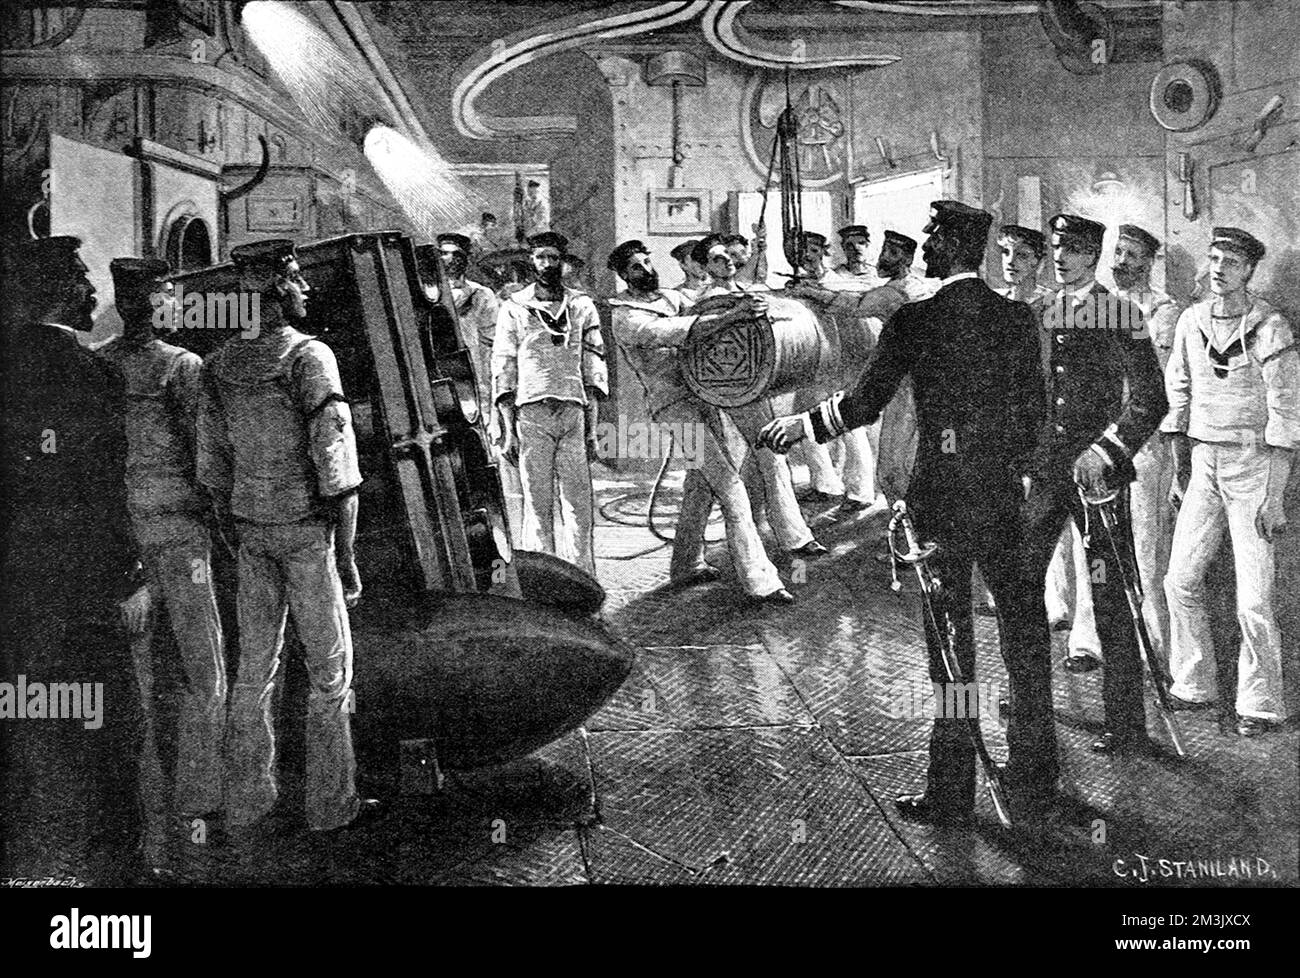 A typical scene on board a British battleship as the gun crew of Royal Navy seamen hoist a cartridge towards the breech of their gun. This image reputedly shows the breech of an 111-ton gun. In the foreground are two officers, wearing swords, directing the operations of the gun crew.     Date: 1896 Stock Photo